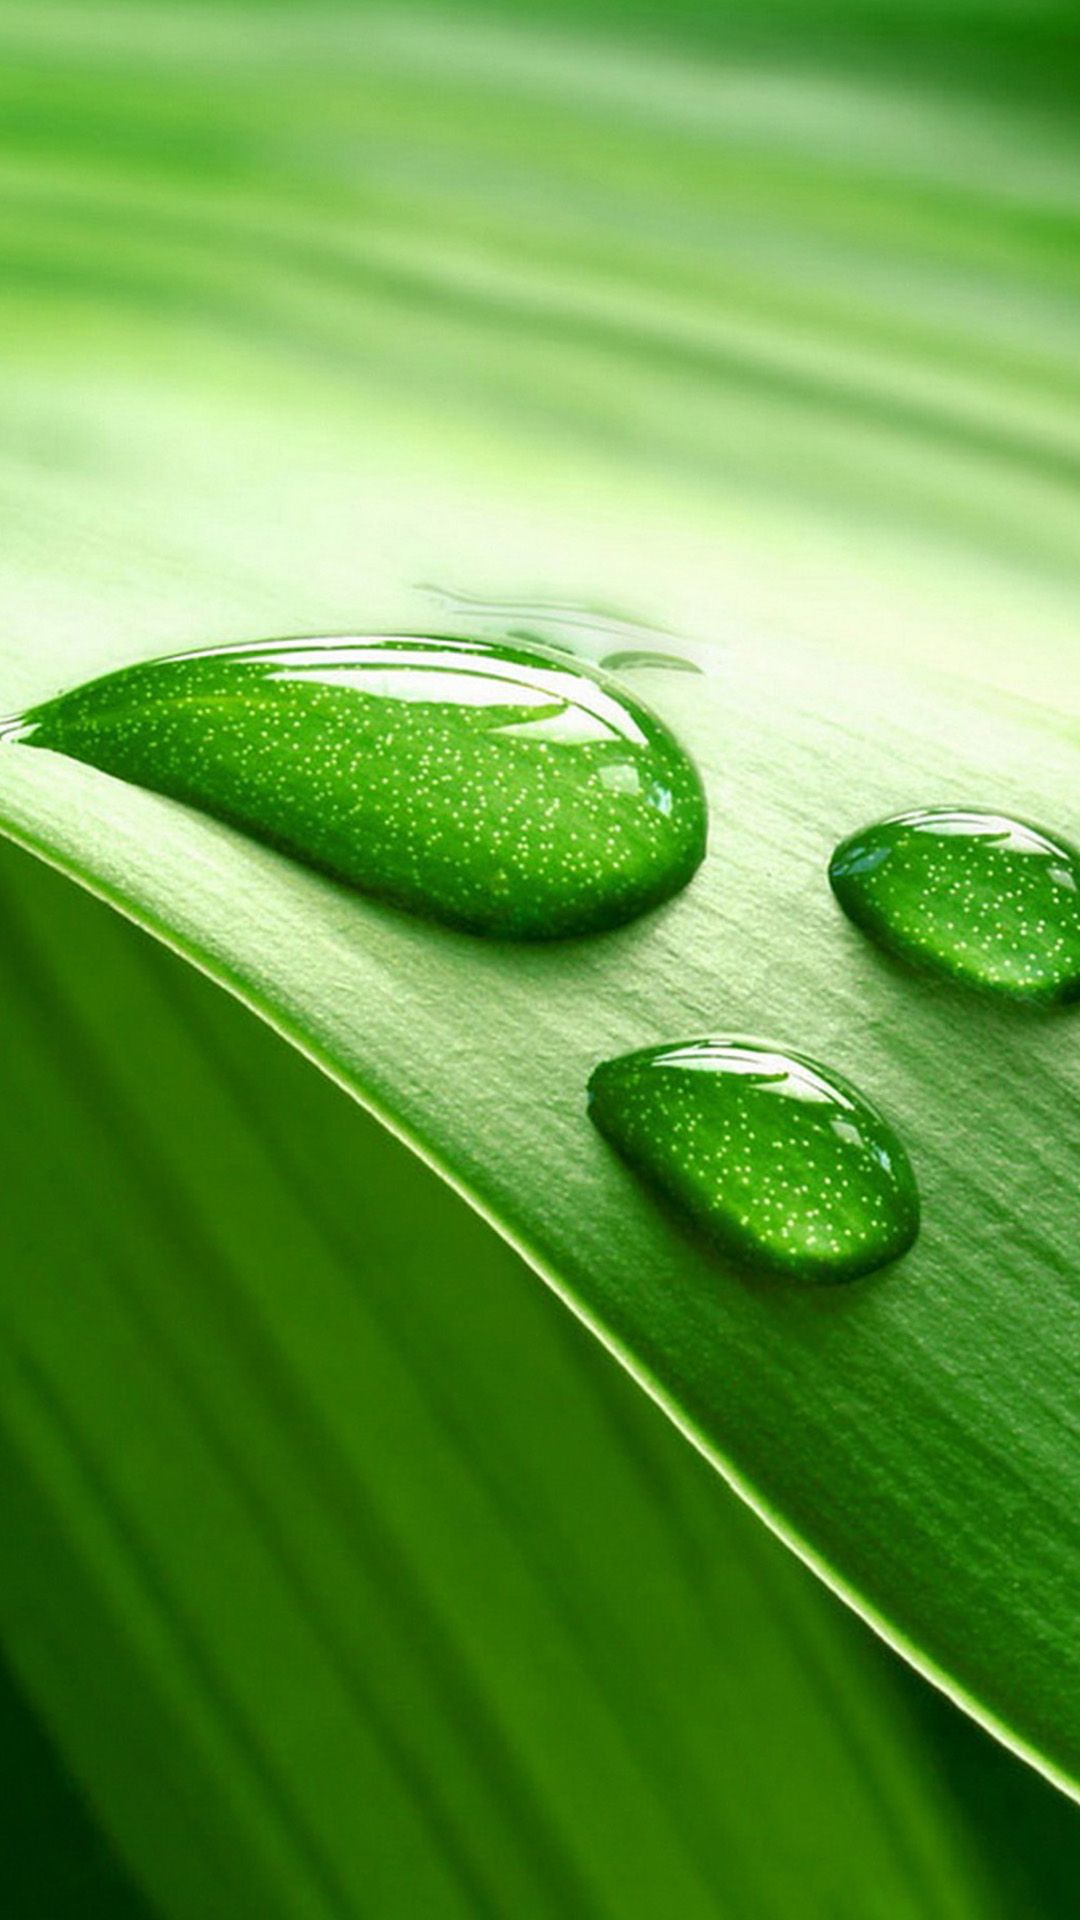 Samsung mobile Wallpaper Leaf And Water Drop